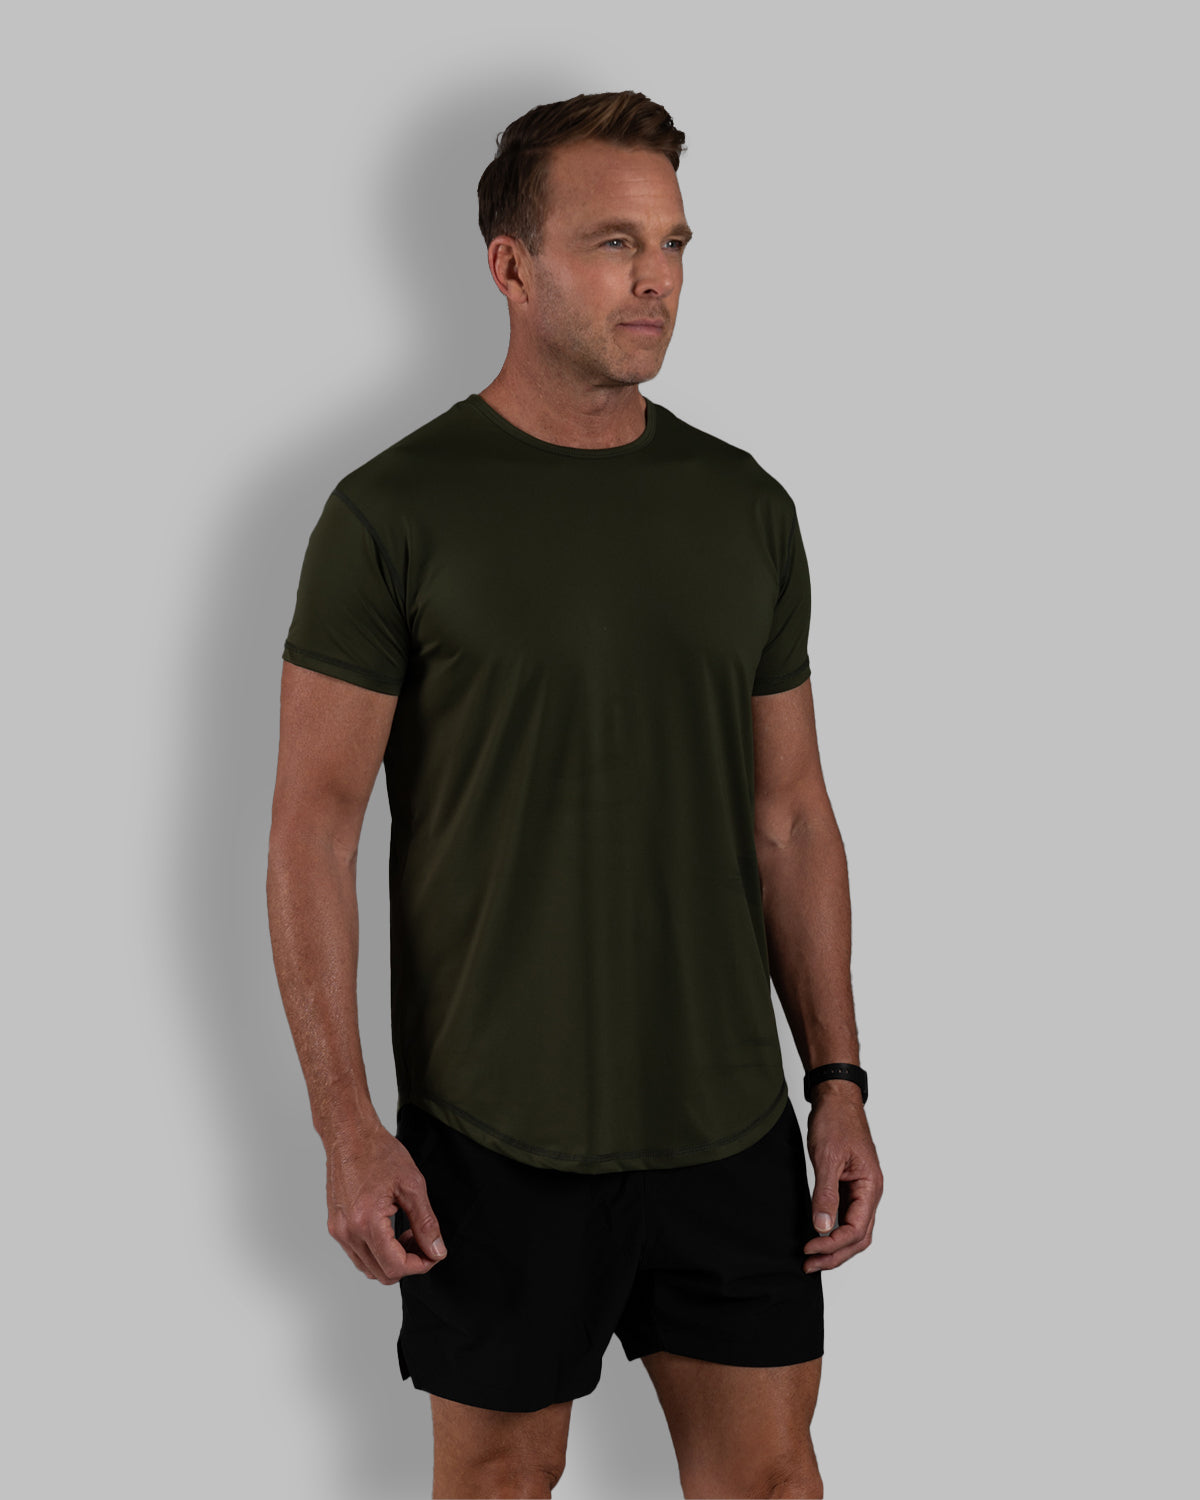 Zero-G Curved T-Shirt: Olive Drab